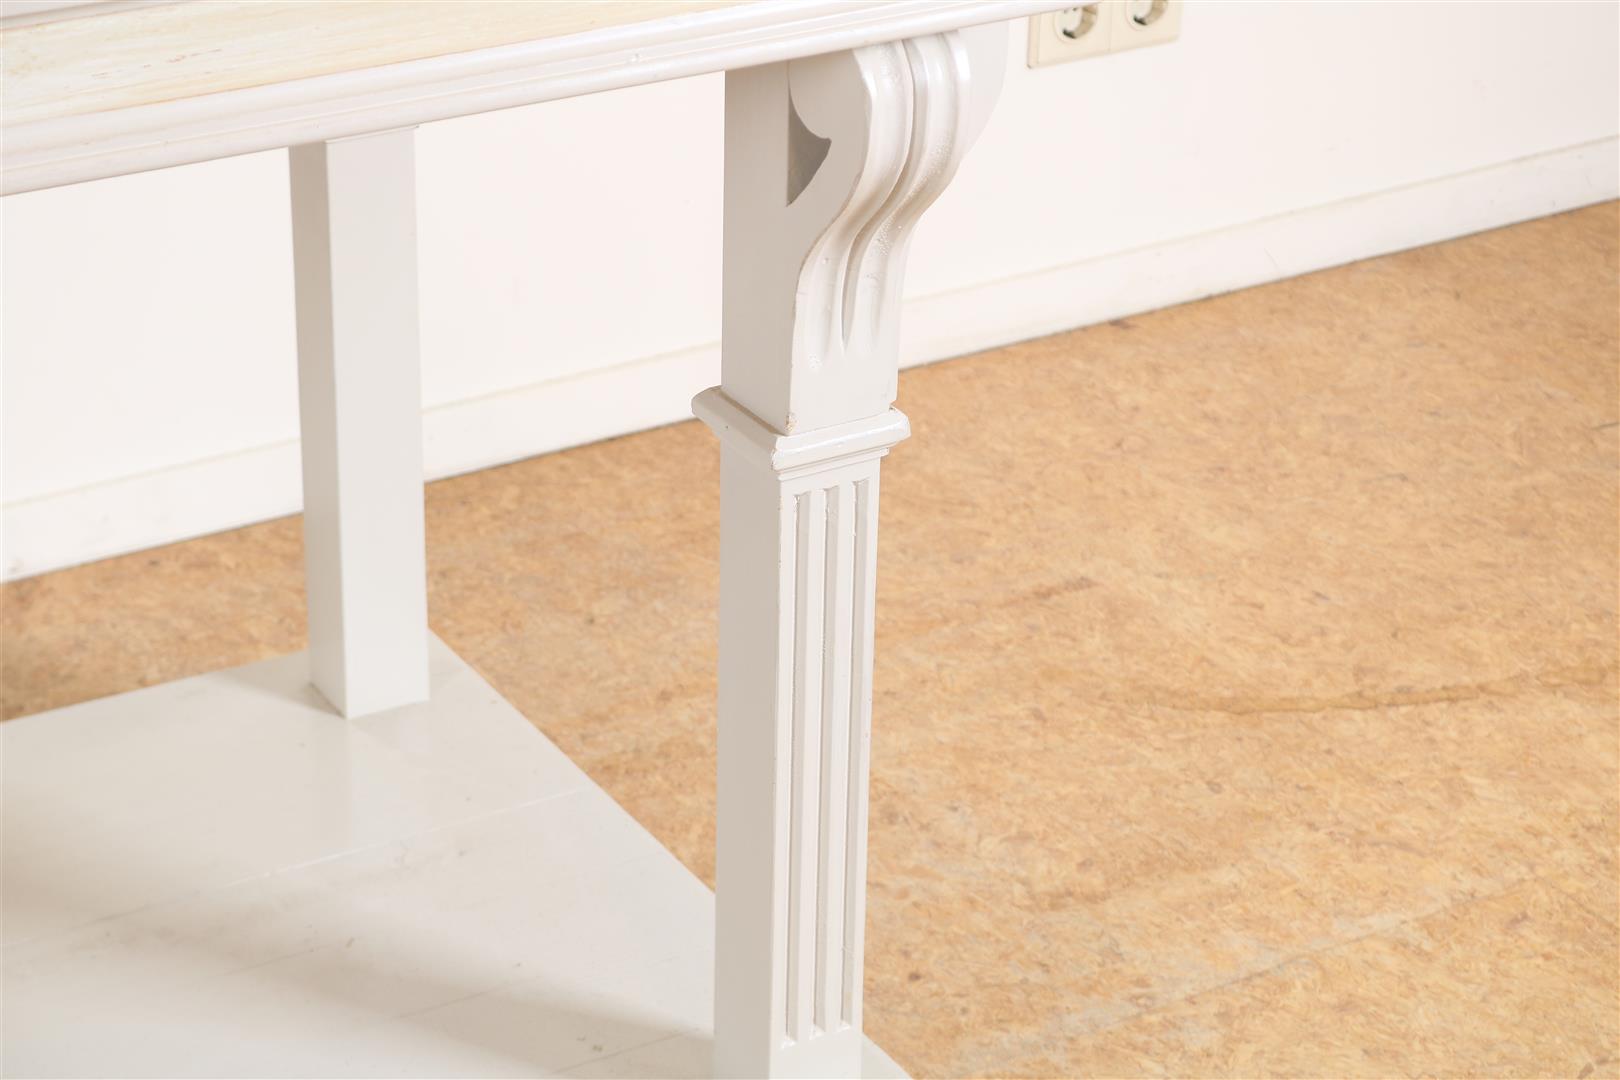 Oak white-painted side table with gray painted top on 6 block legs connected by platform, 82 x 200 x - Image 5 of 5